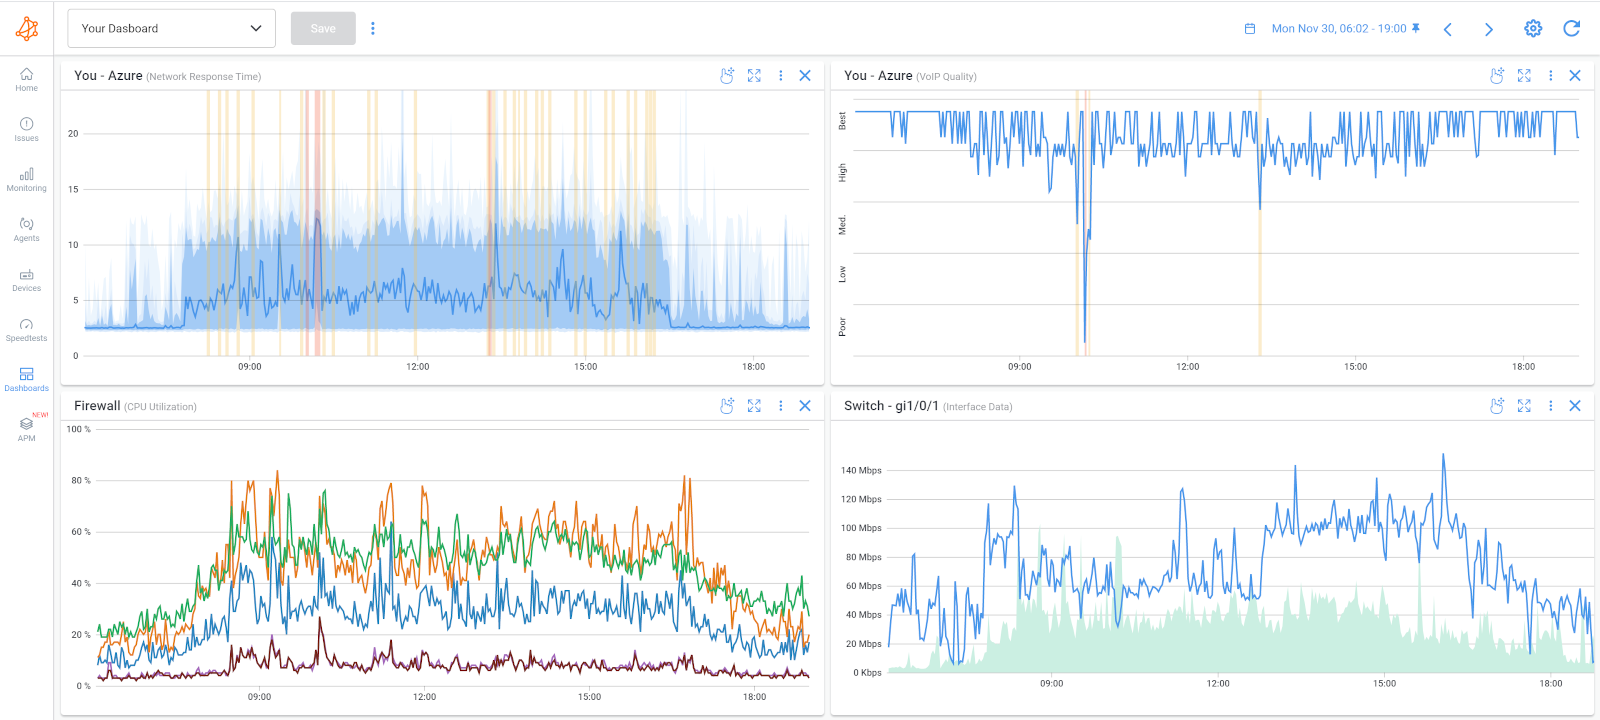 Network SNMP Monitoring Dashboard